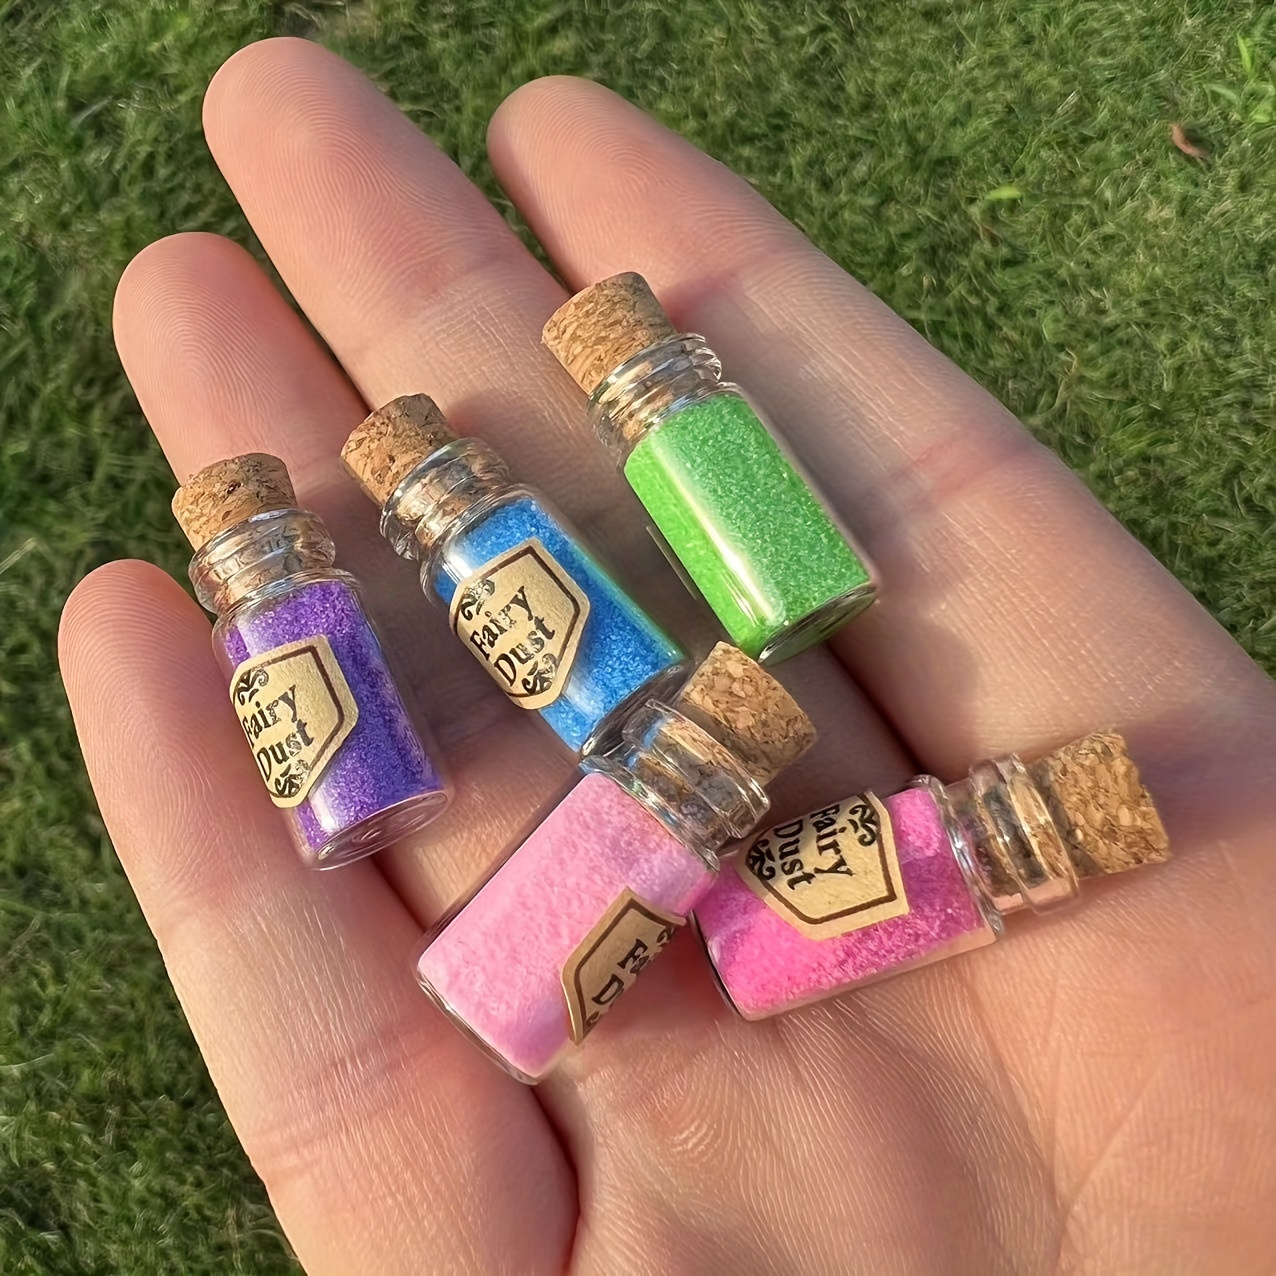 

5pcs Miniature Glitter Bottles - Sparkling Magic Dust In Assorted Colors, With Corks For Birthday, Carnivals, Christmas, Fairy-themed Parties - For Ages 14+